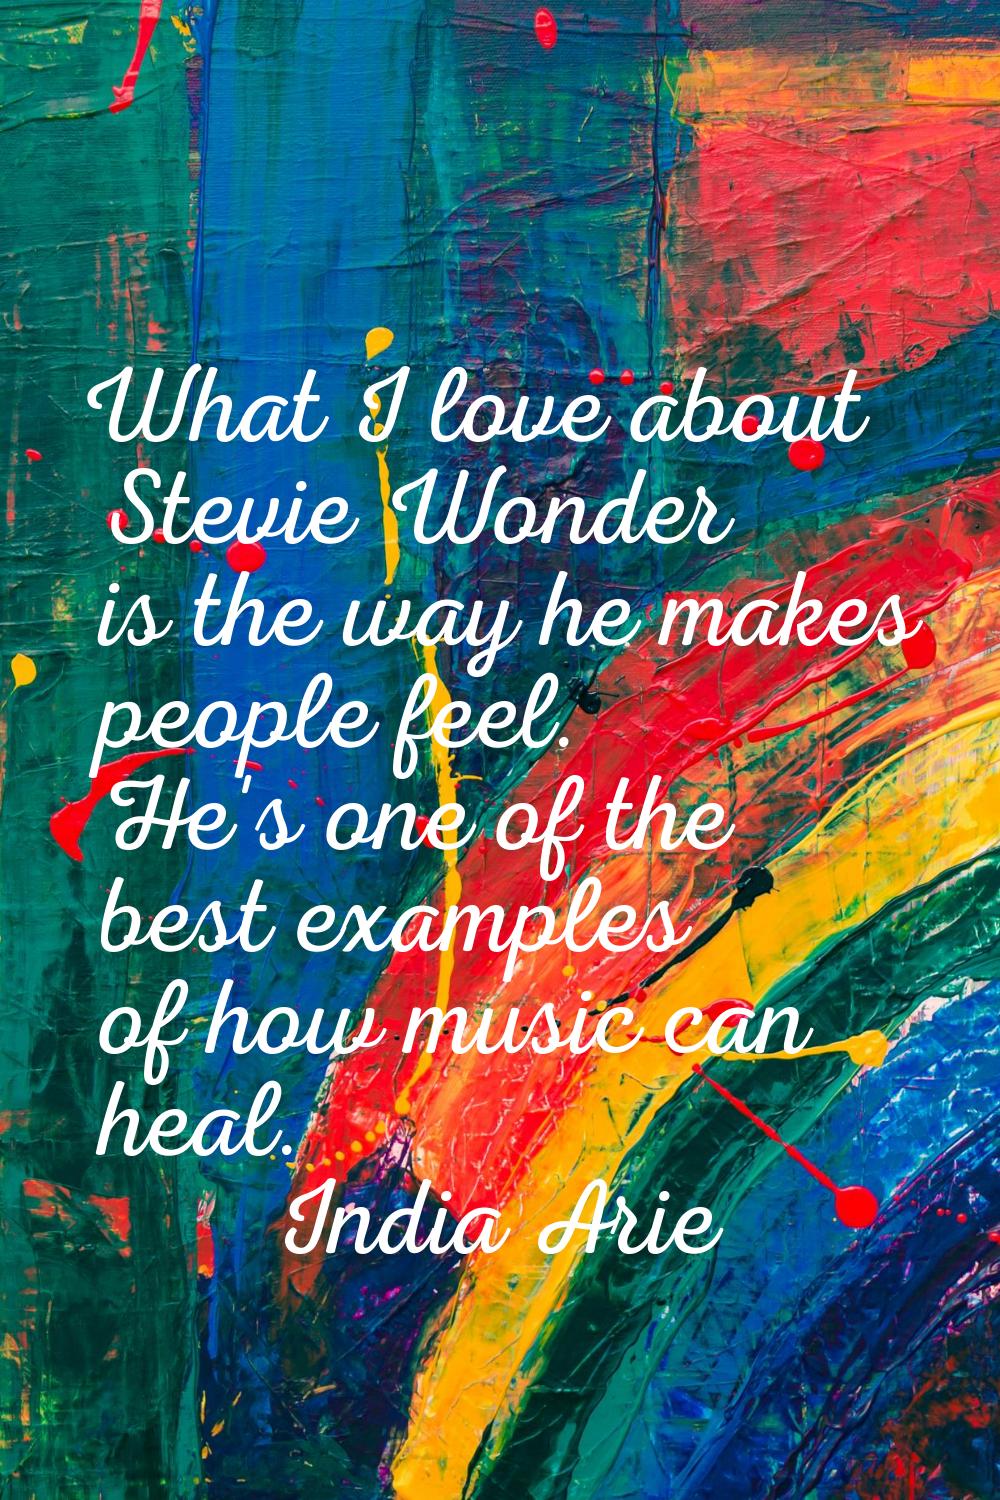 What I love about Stevie Wonder is the way he makes people feel. He's one of the best examples of h